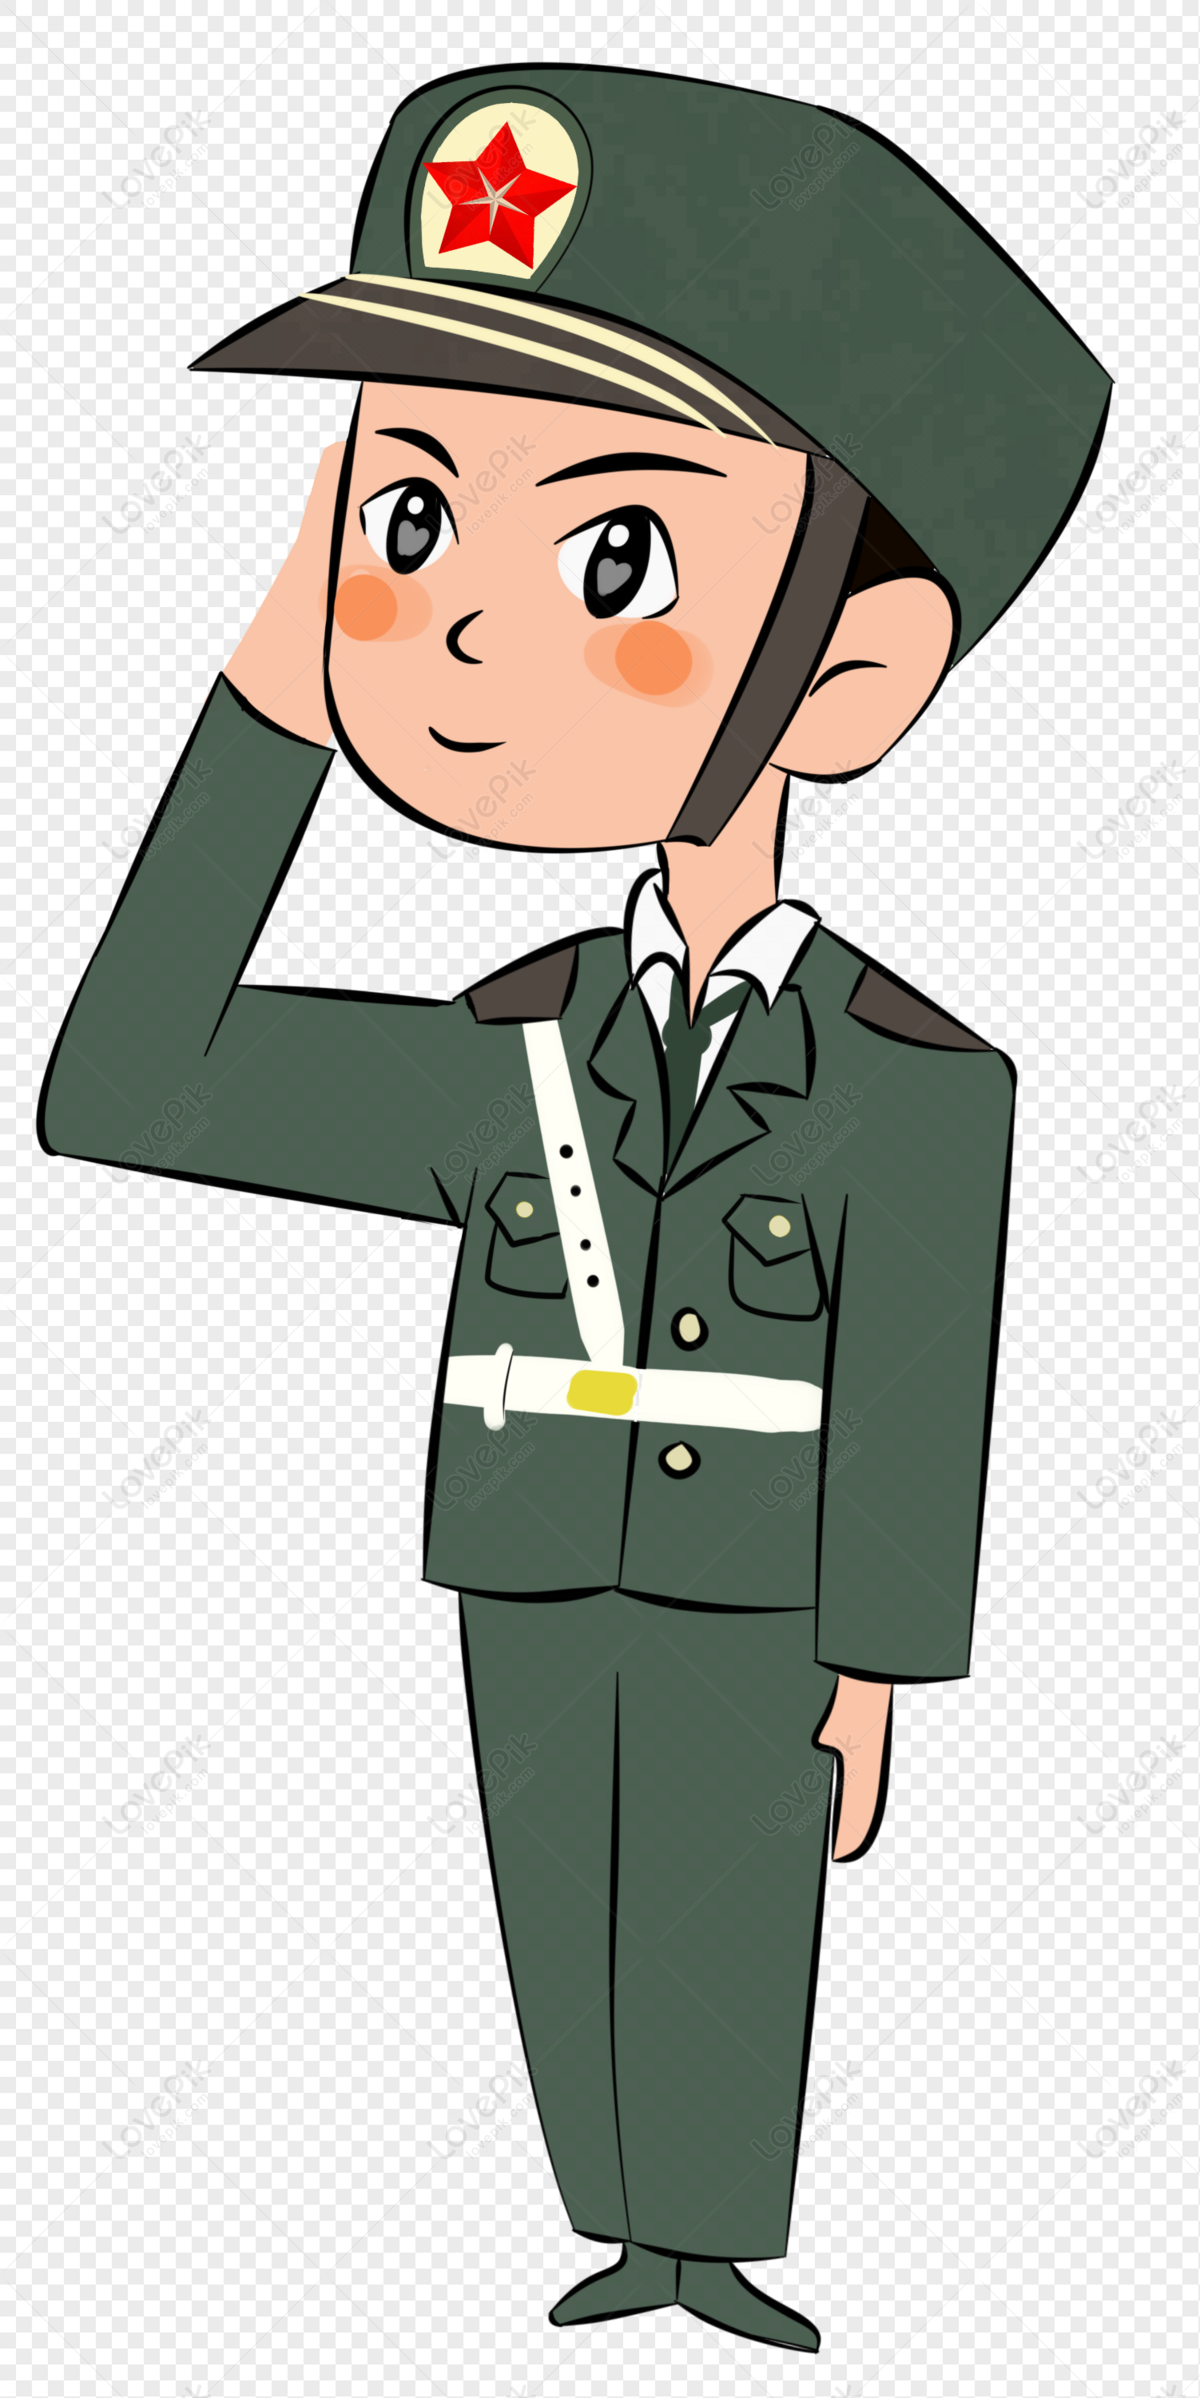 Saluting Cartoon Little Soldier Hand Drawn PNG Hd Transparent Image And  Clipart Image For Free Download - Lovepik | 401447544